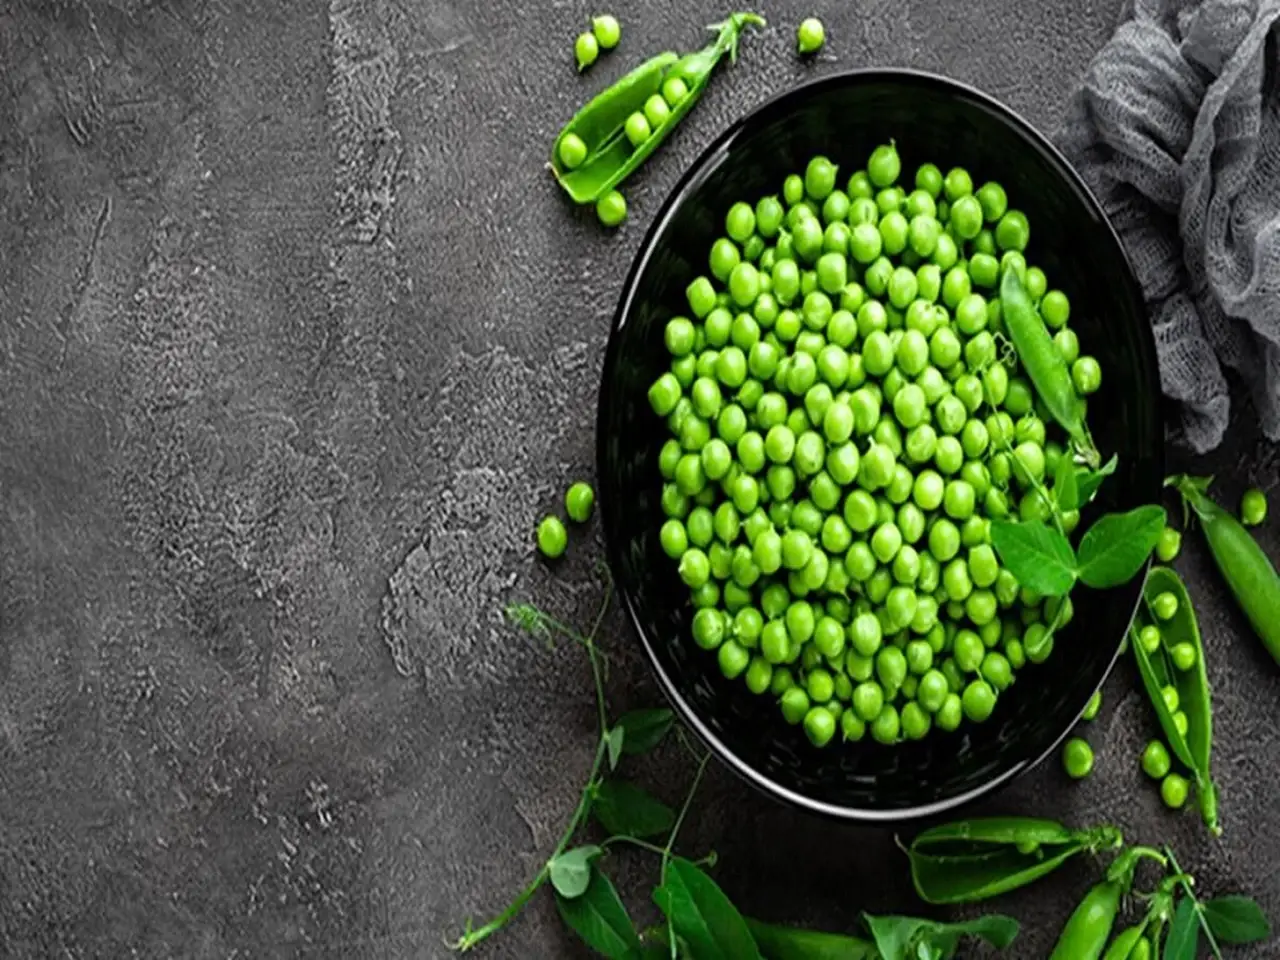 green peas are a very low-fat food